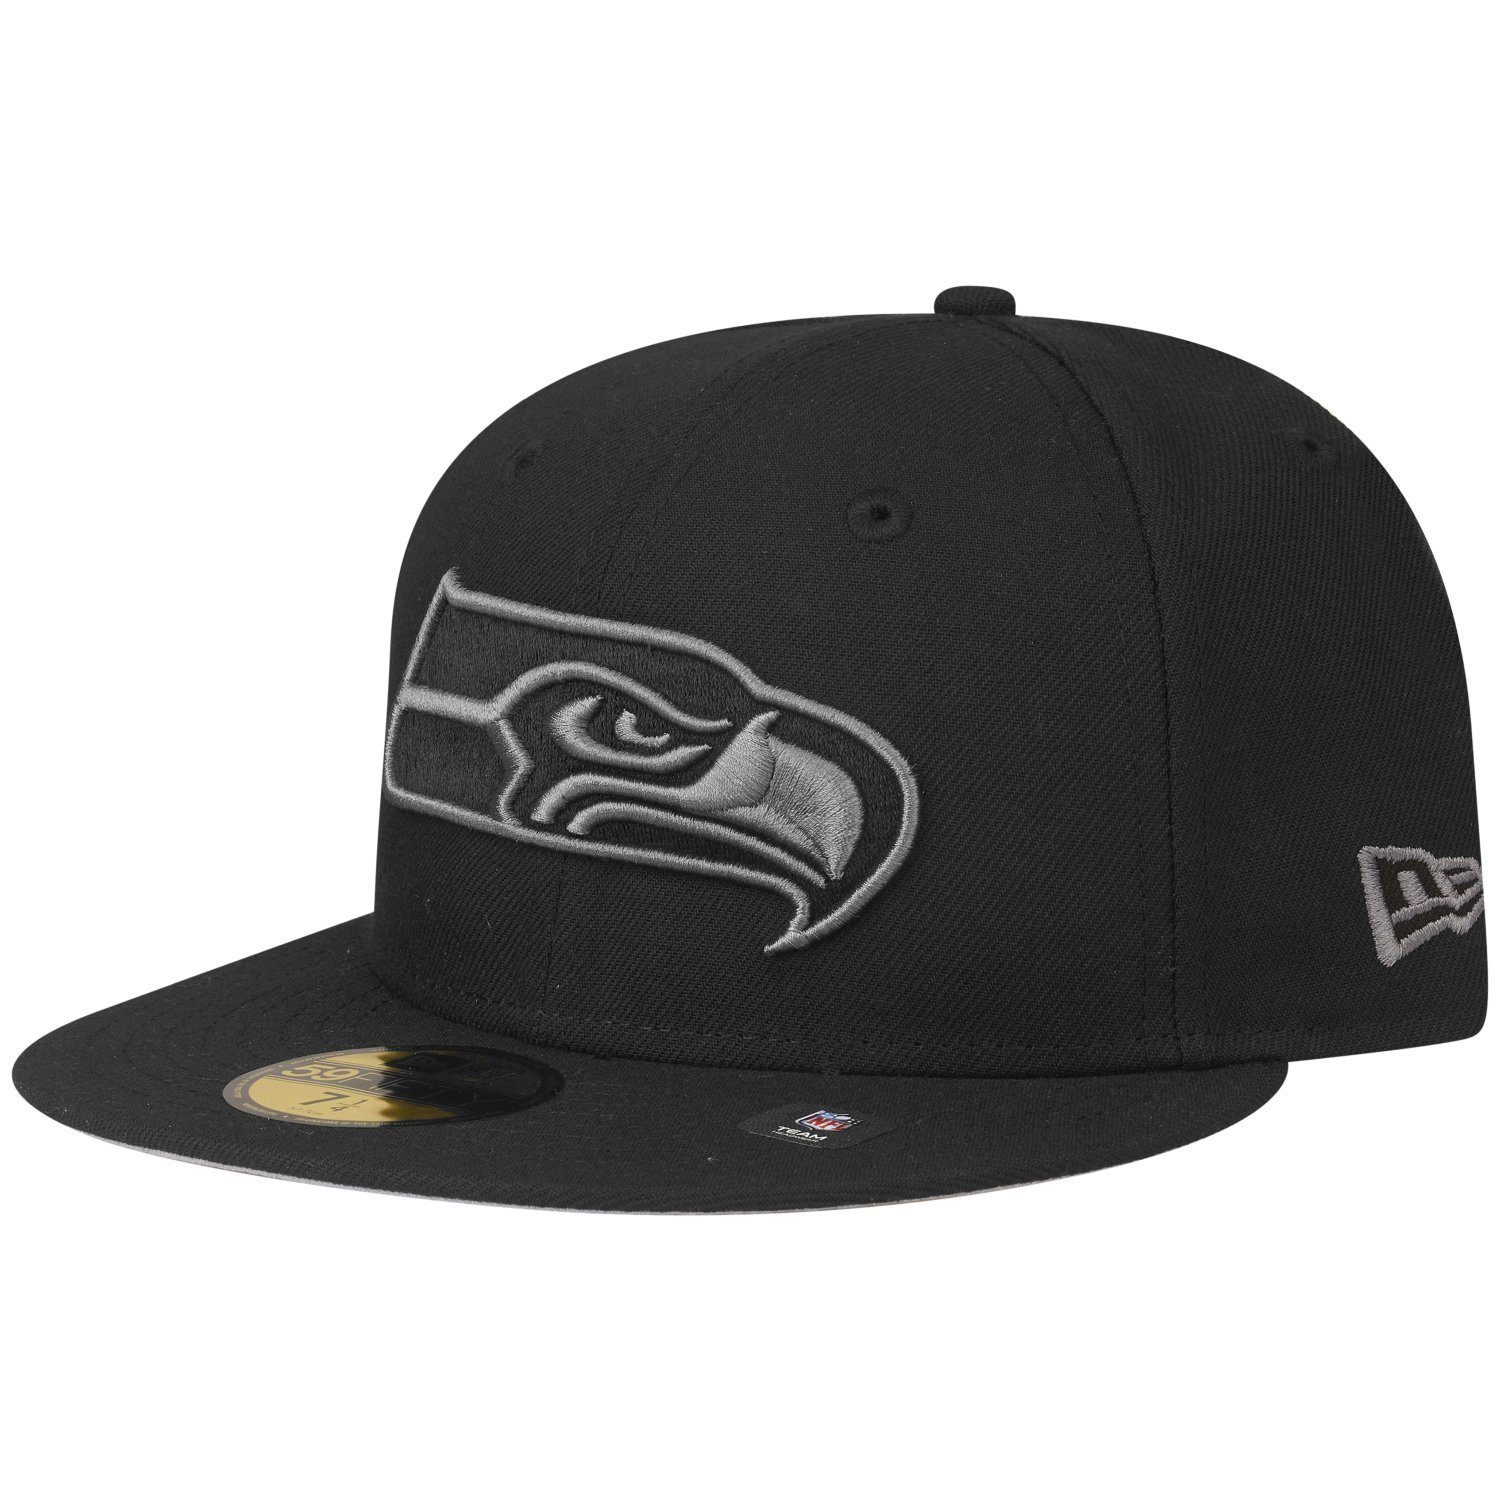 New Era Fitted Cap 59Fifty NFL TEAMS Seattle Seahawks